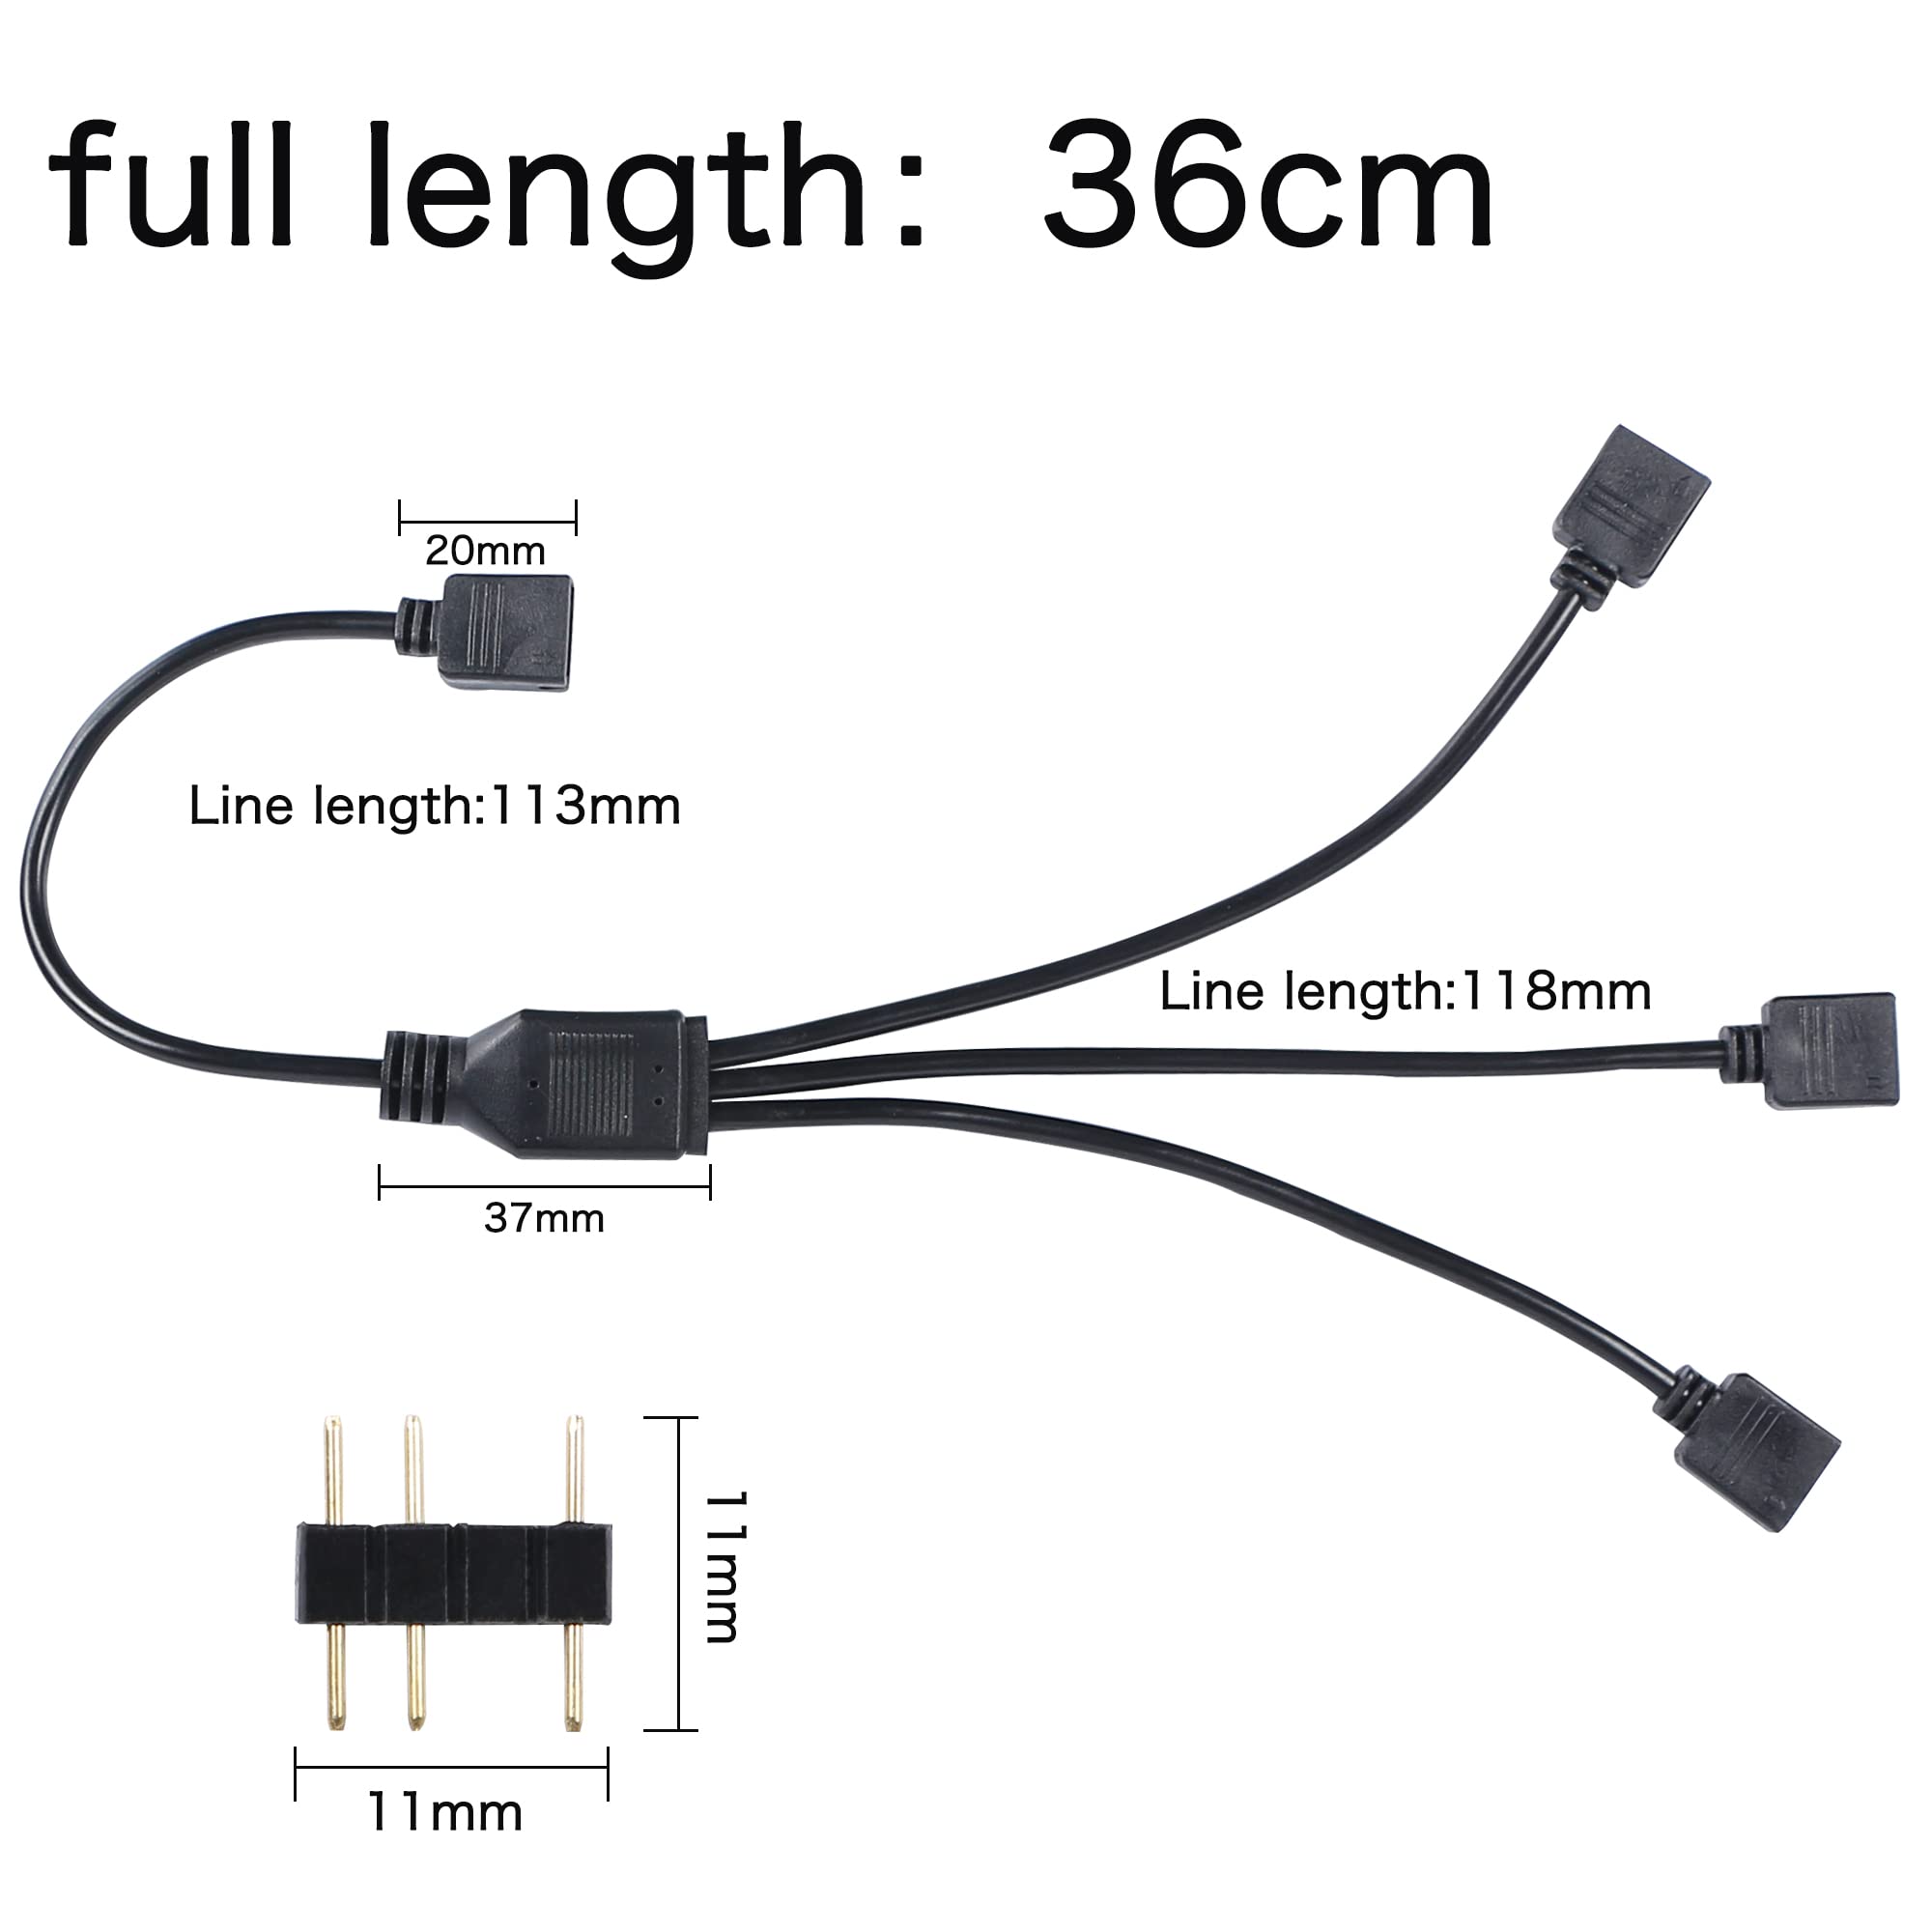 YACSEJAO ARGB Splitter Cable 5V 3Pin Addressable RGB 1 to 3 Splitter Cable with Male Pins for Computer Chassis, CPU Cooler and 5V ARGB Fan